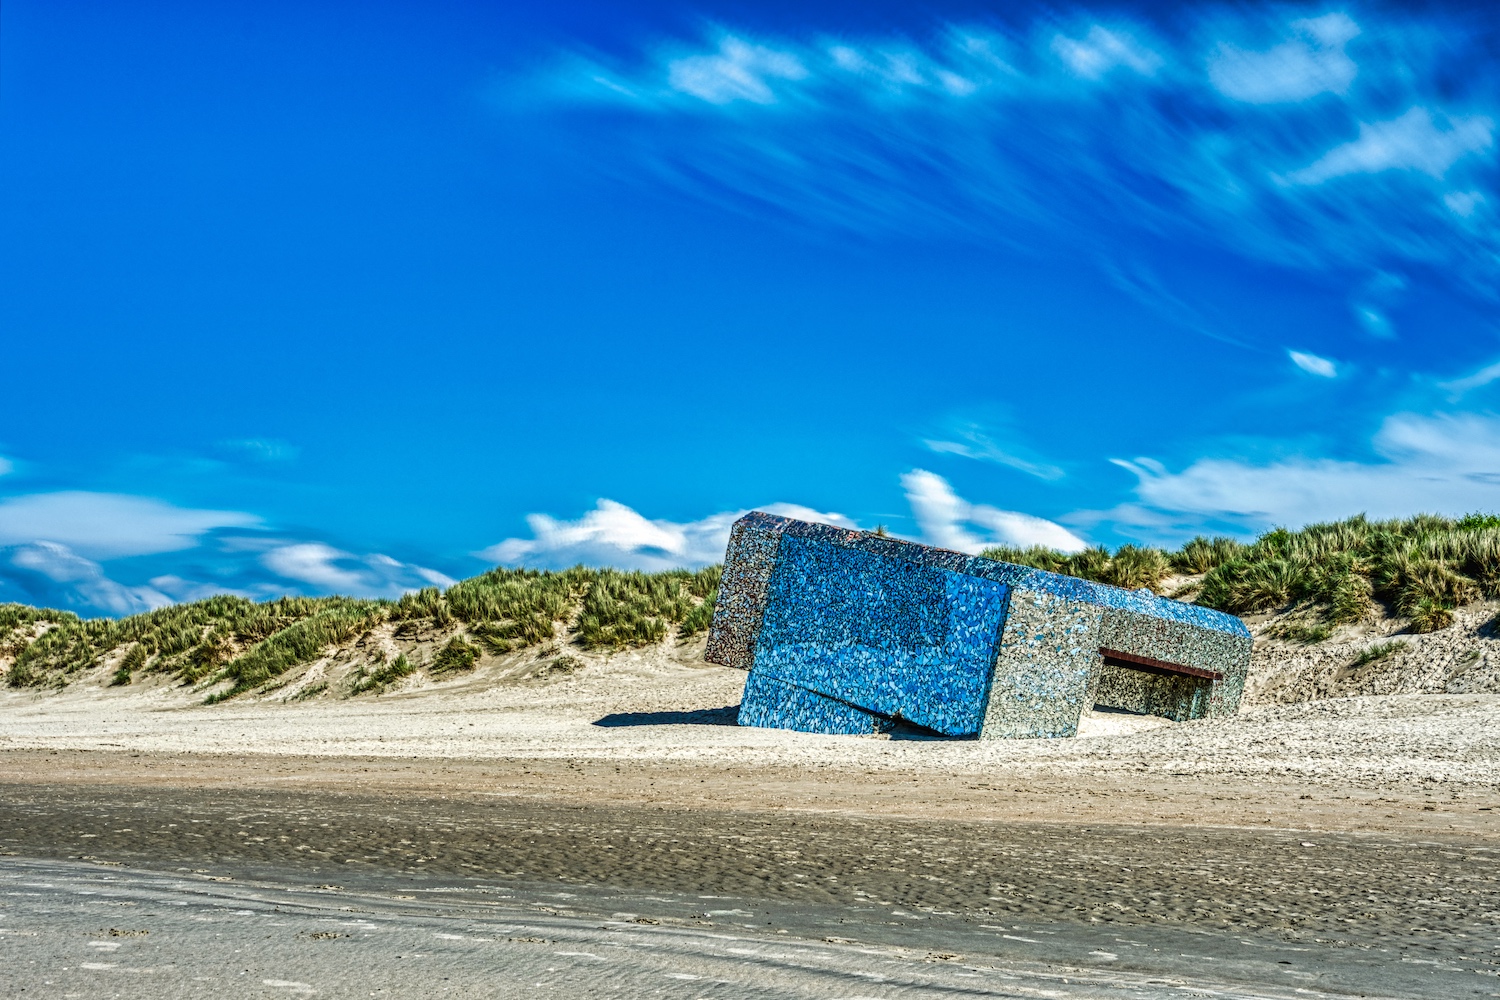 Mirrored bunker at the beach of Dunkerque